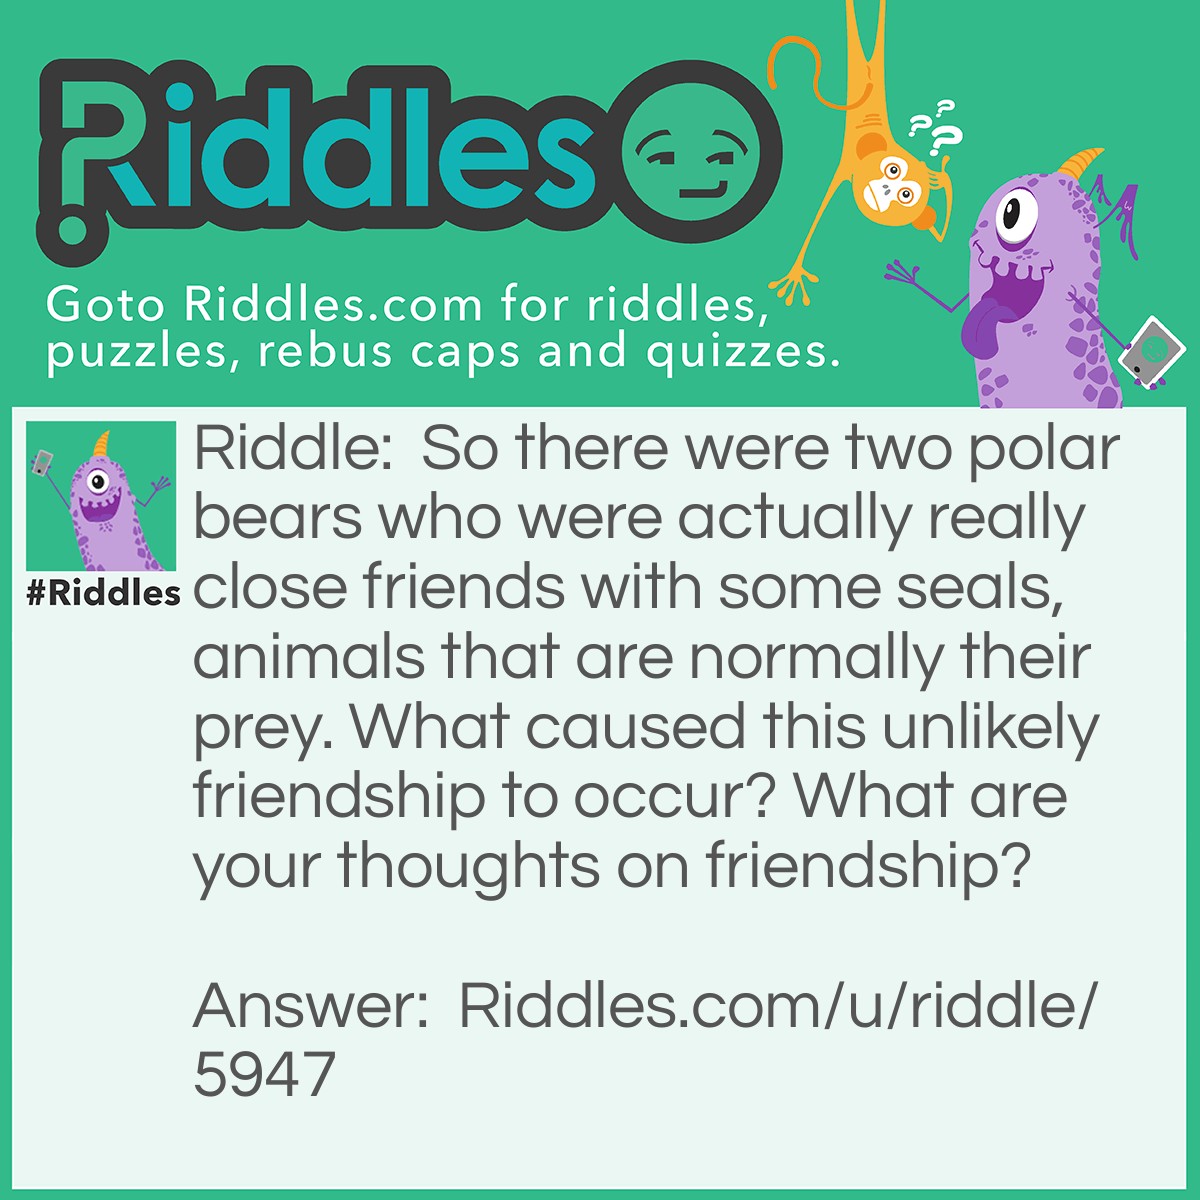 Riddle: So there were two polar bears who were actually really close friends with some seals, animals that are normally their prey. What caused this unlikely friendship to occur? What are your thoughts on friendship? Answer: They were really chill polar bears.